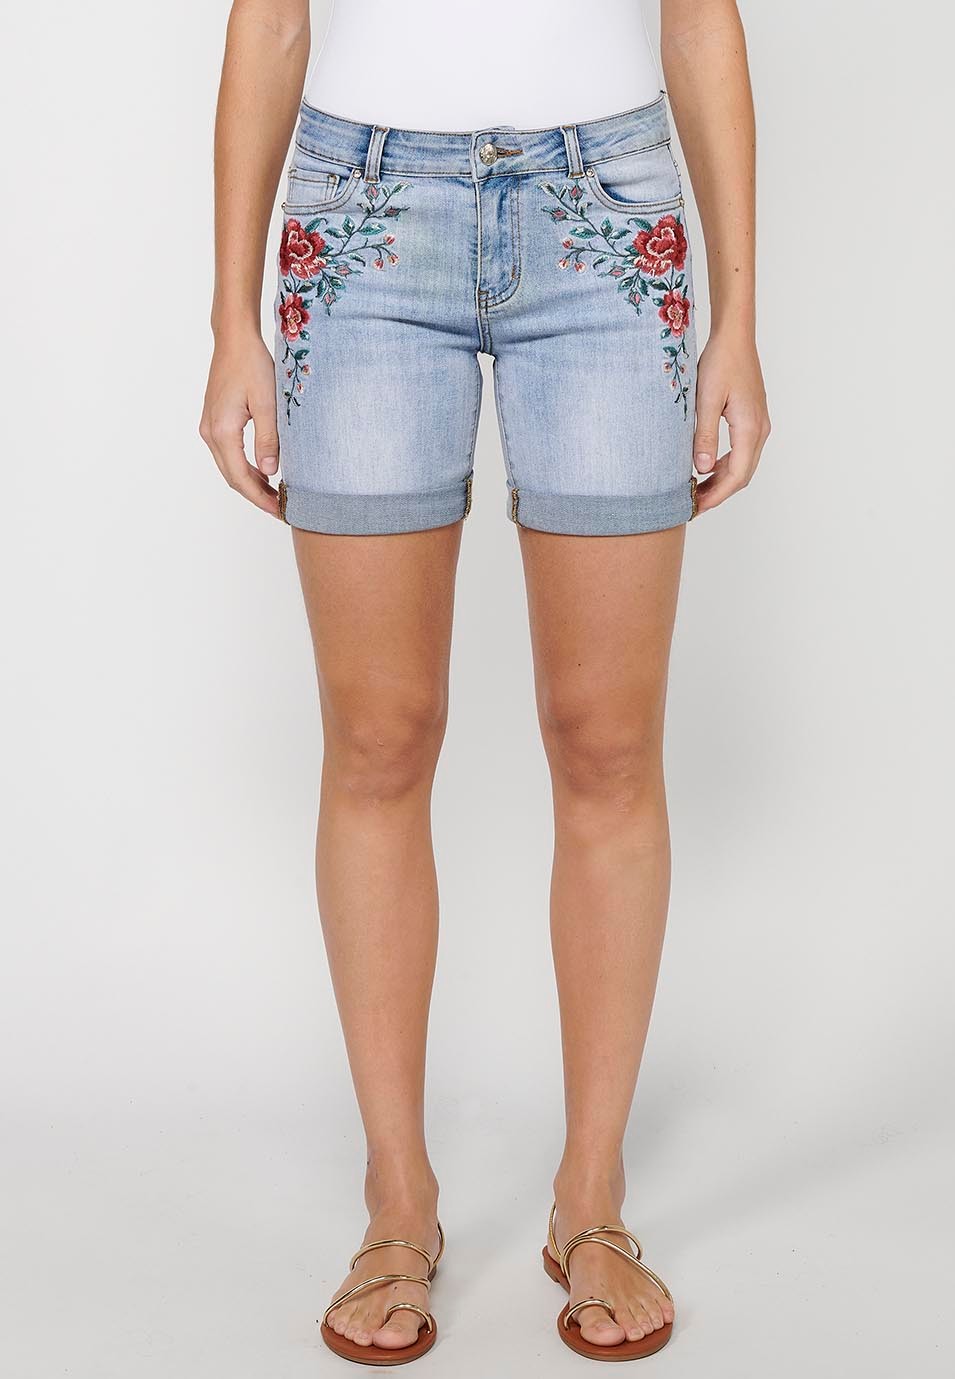 Denim shorts with front zipper and button closure and front floral embroidered details with five pockets, one blue pocket pocket for women 2